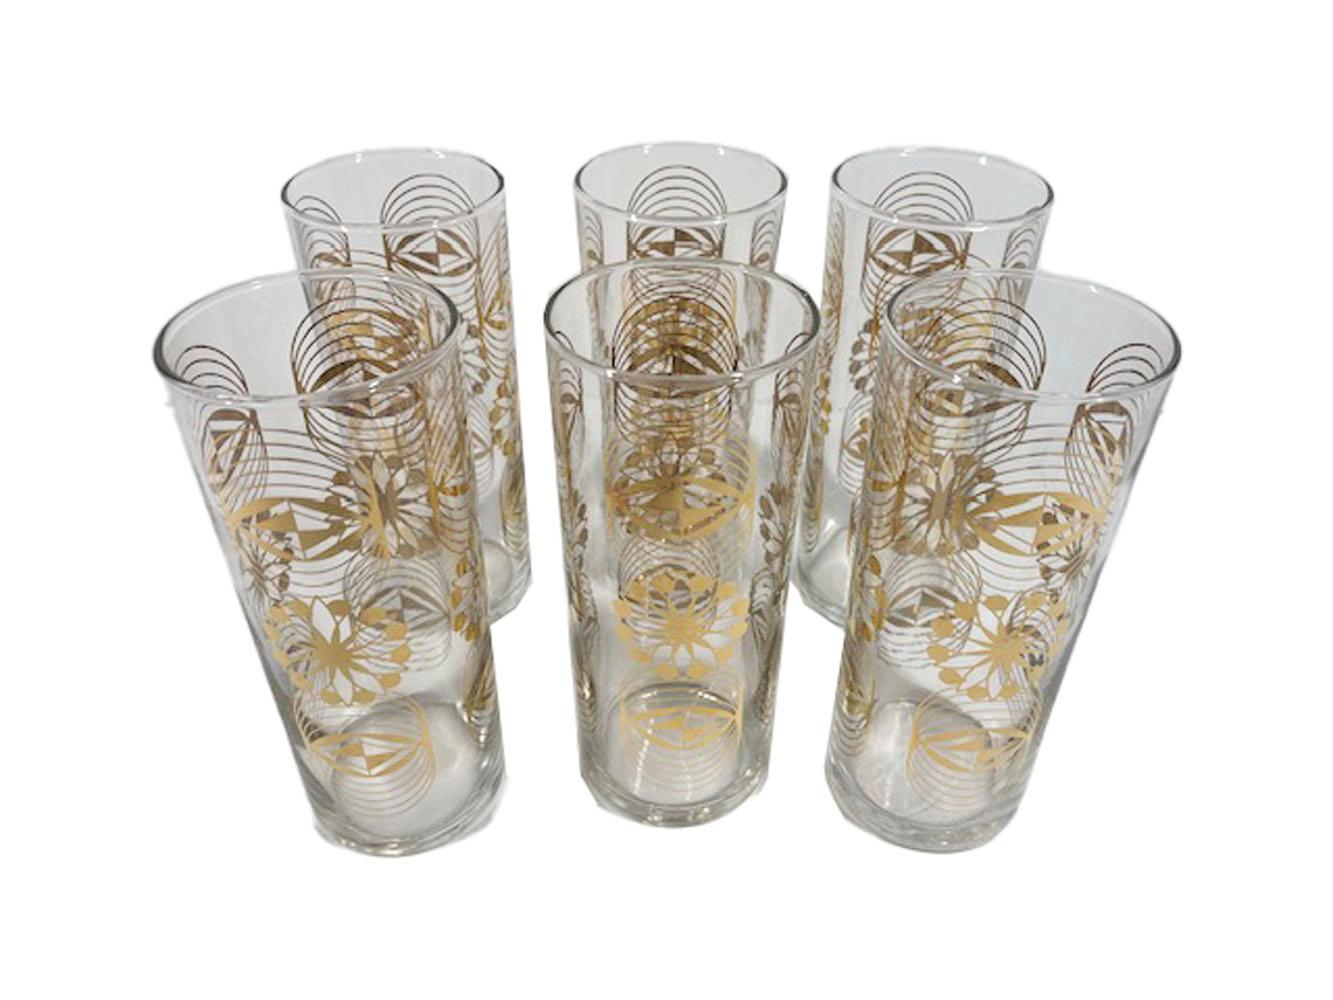 Set of 6 highball glasses by Ravenhead, decorated with 22 karat gold in geometric patterns of the atomic period.